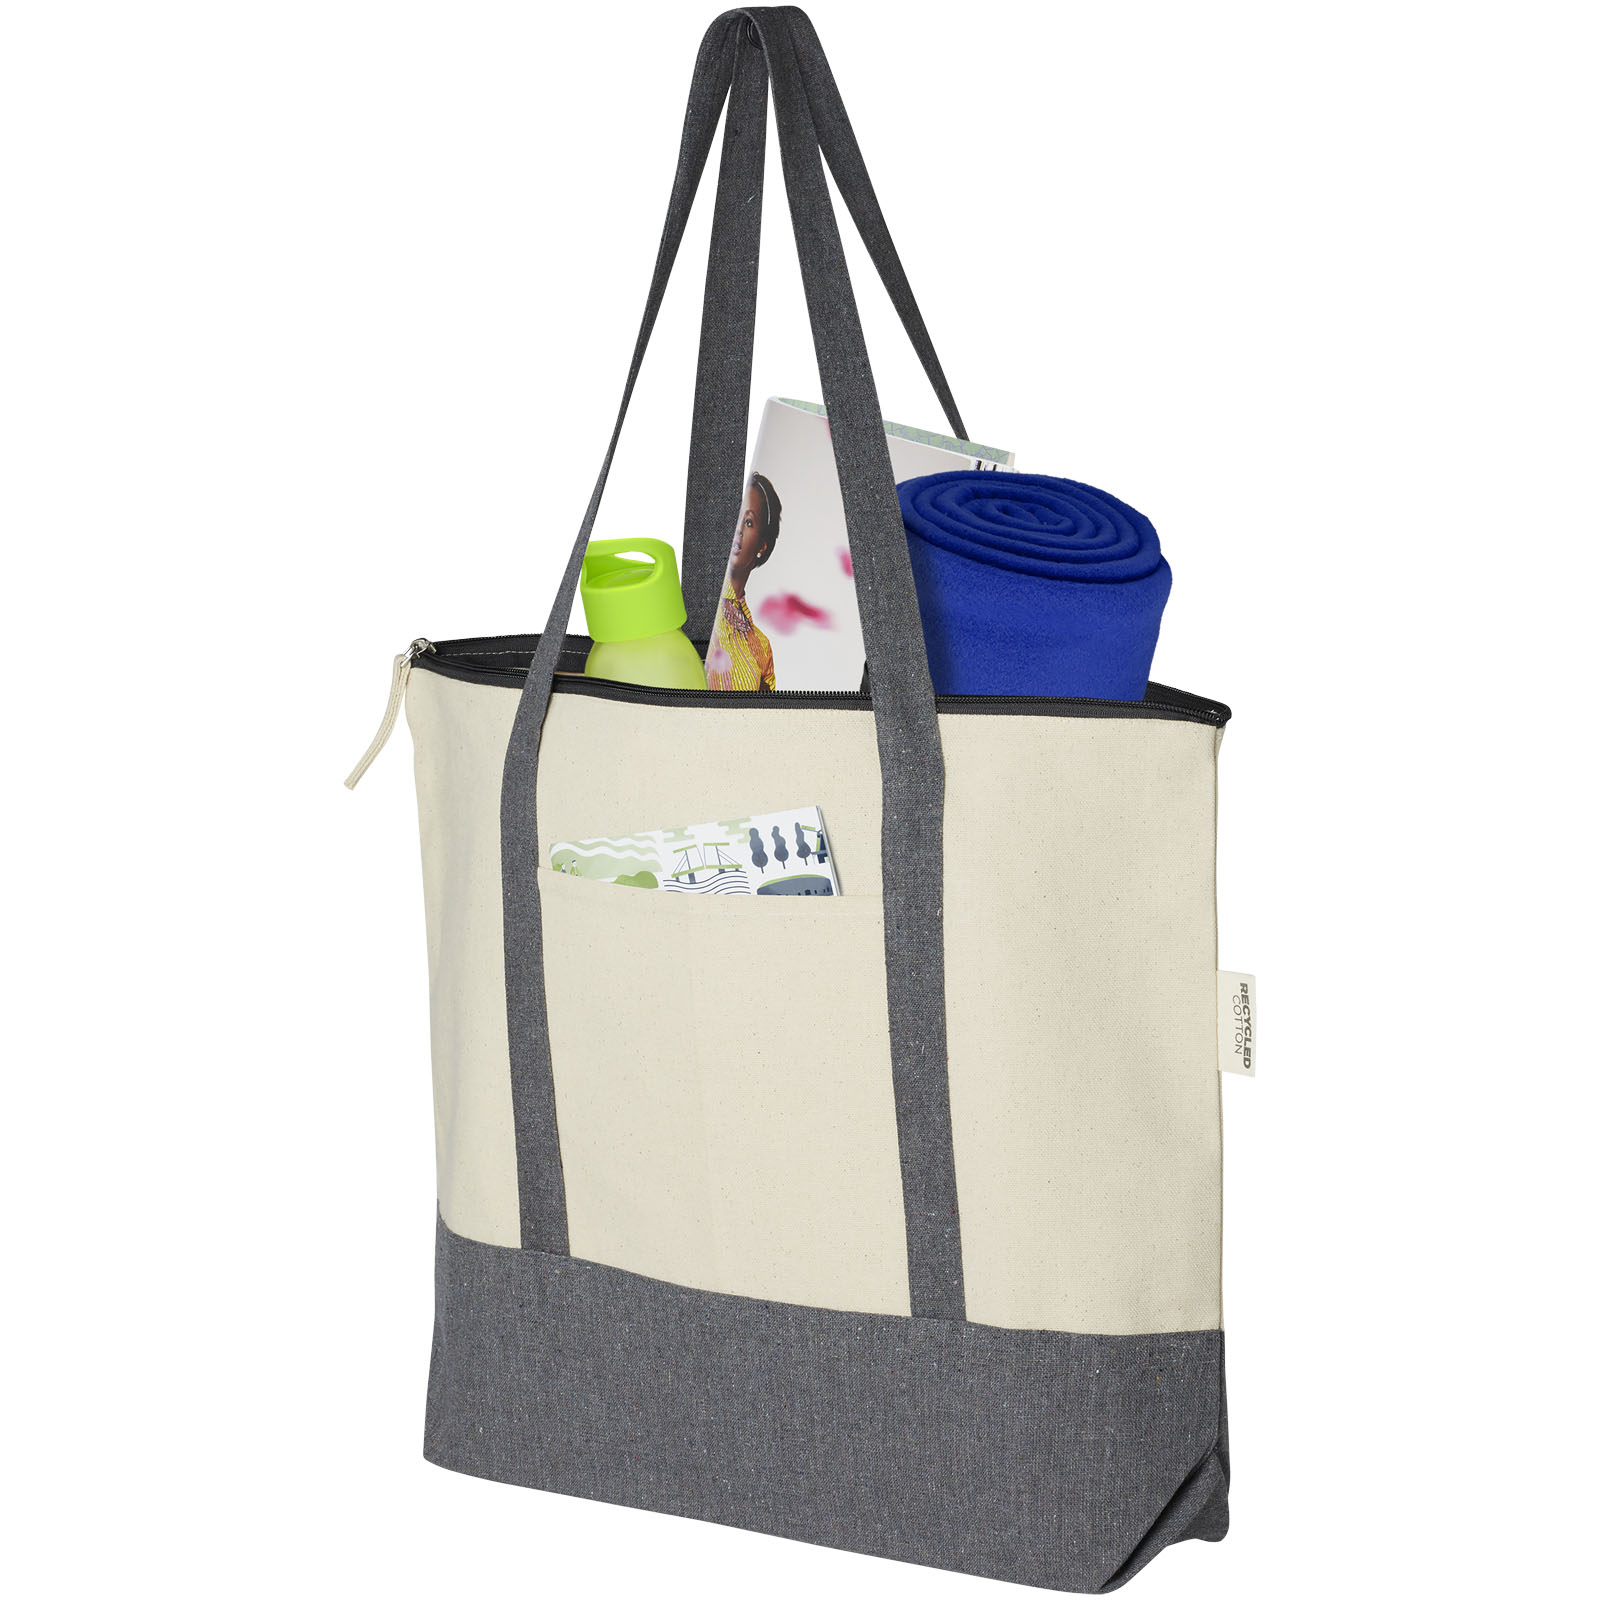 Advertising Shopping & Tote Bags - Repose 320 g/m² recycled cotton zippered tote bag 10L - 3